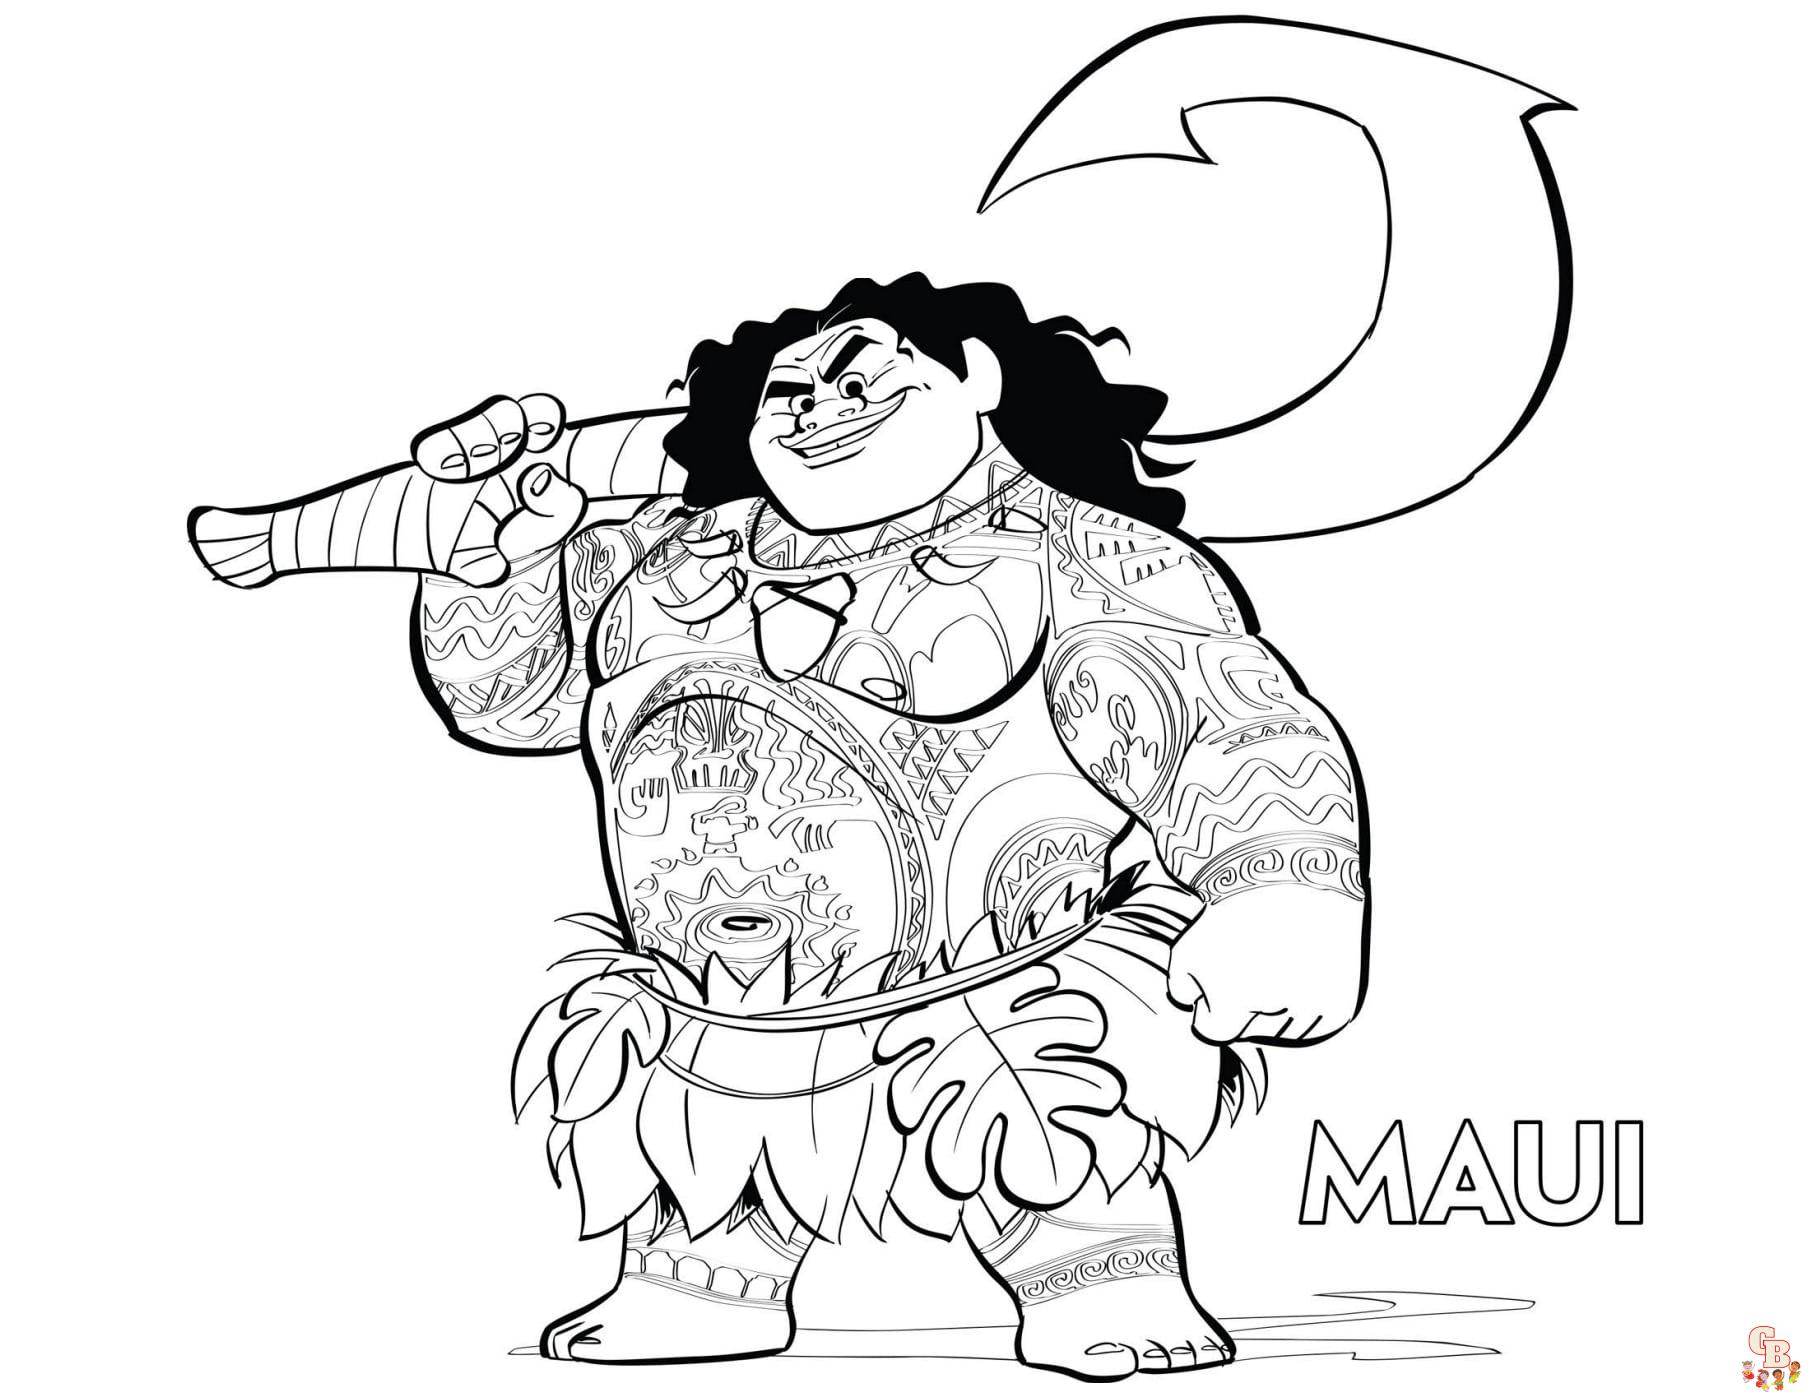 Maui From Moana Coloring Pages: Free Printable Sheets for Kids